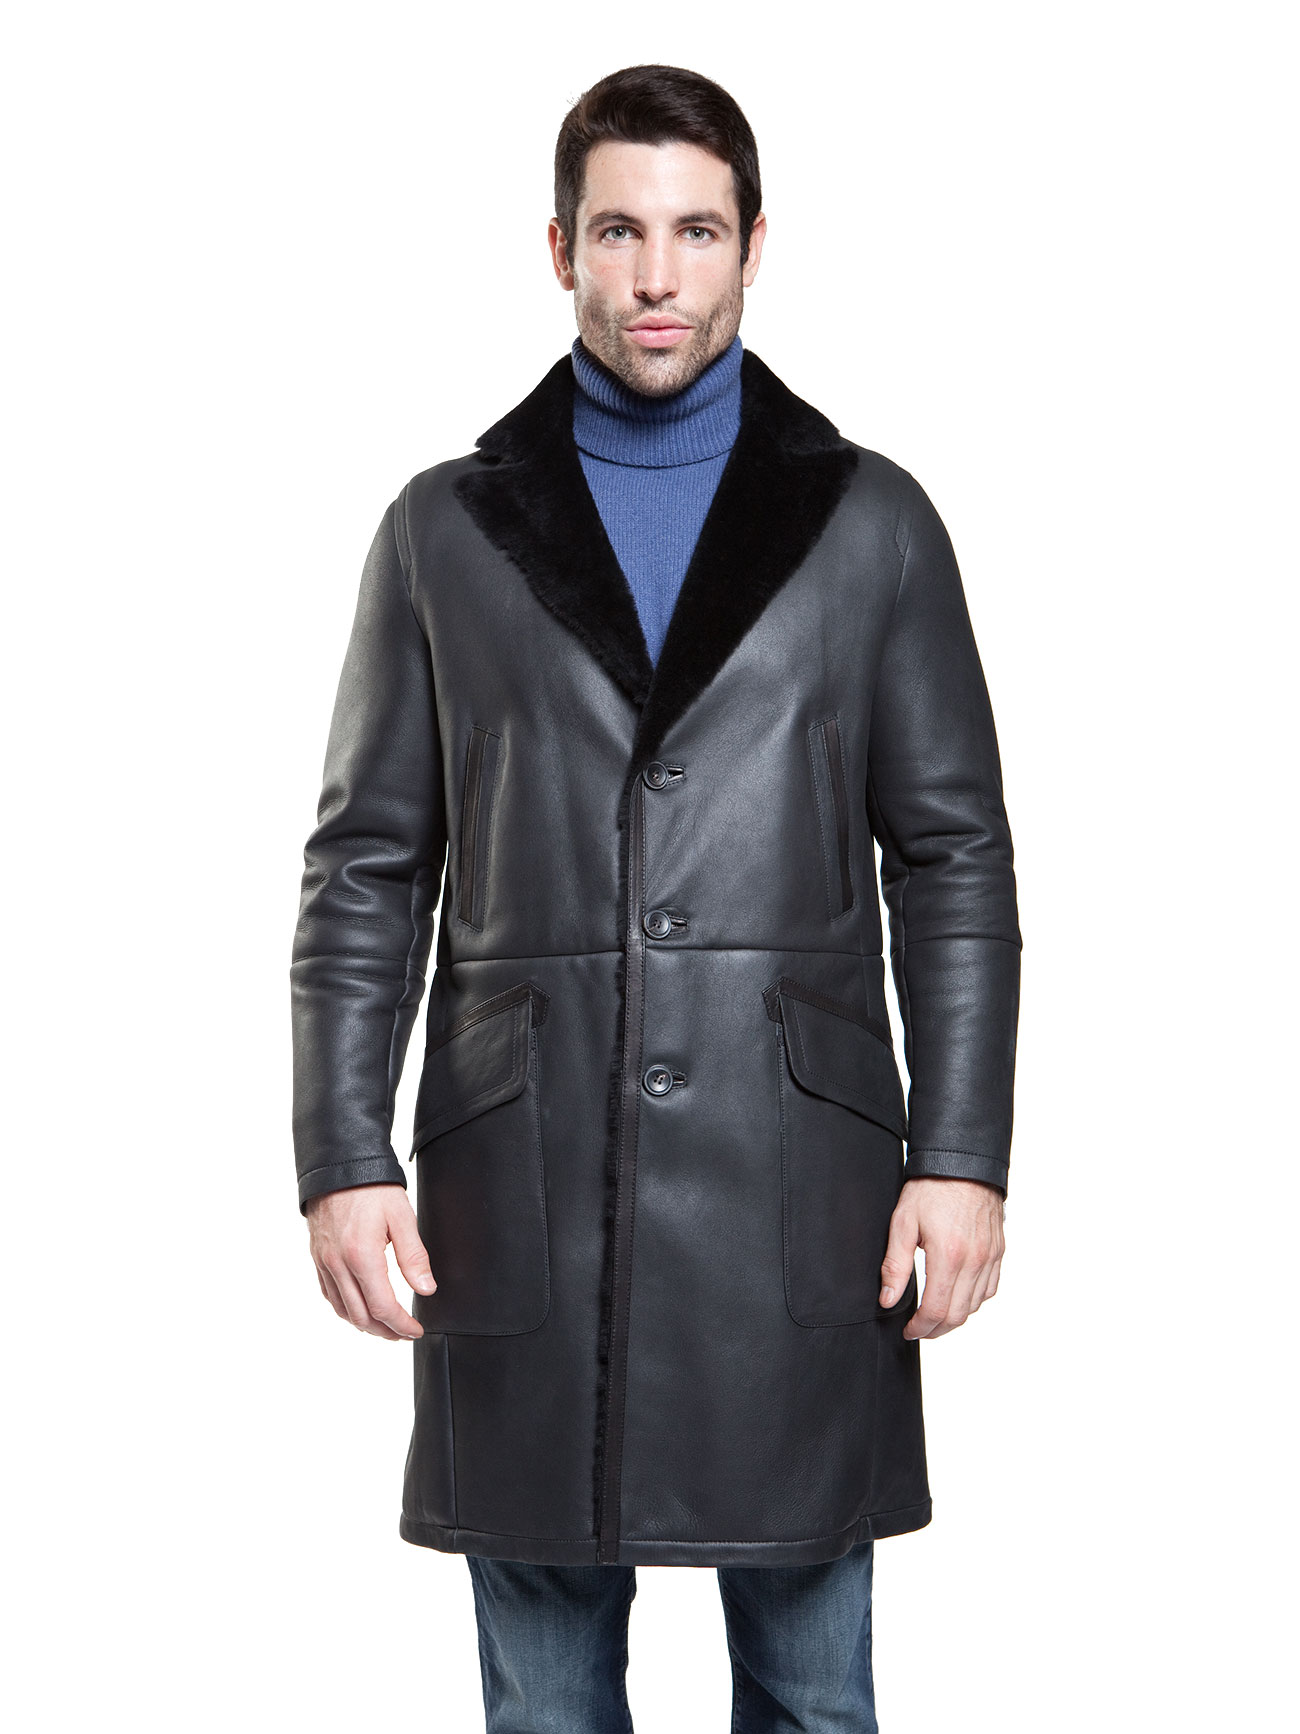 Shearling Coats and Shearling Jackets by AstonLeather